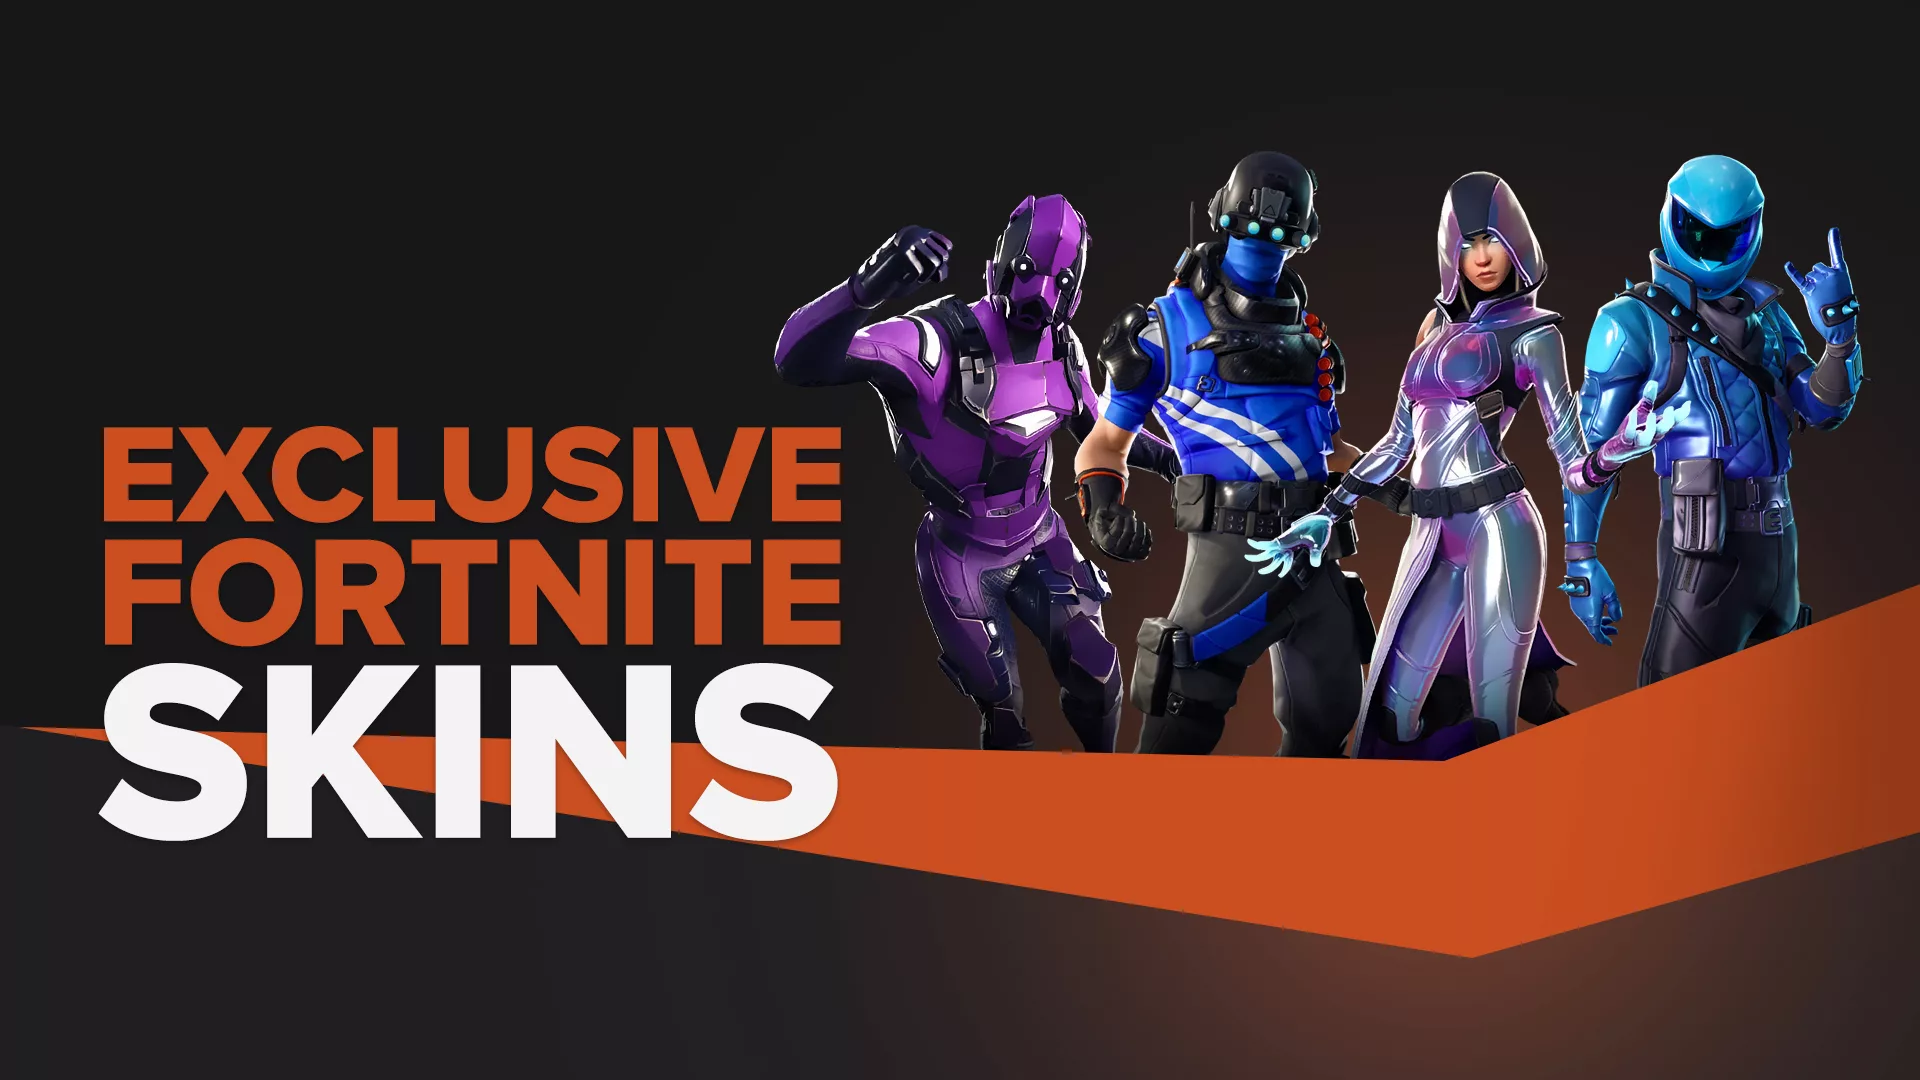 These 12 Fortnite Skins Are Truly Exclusive!